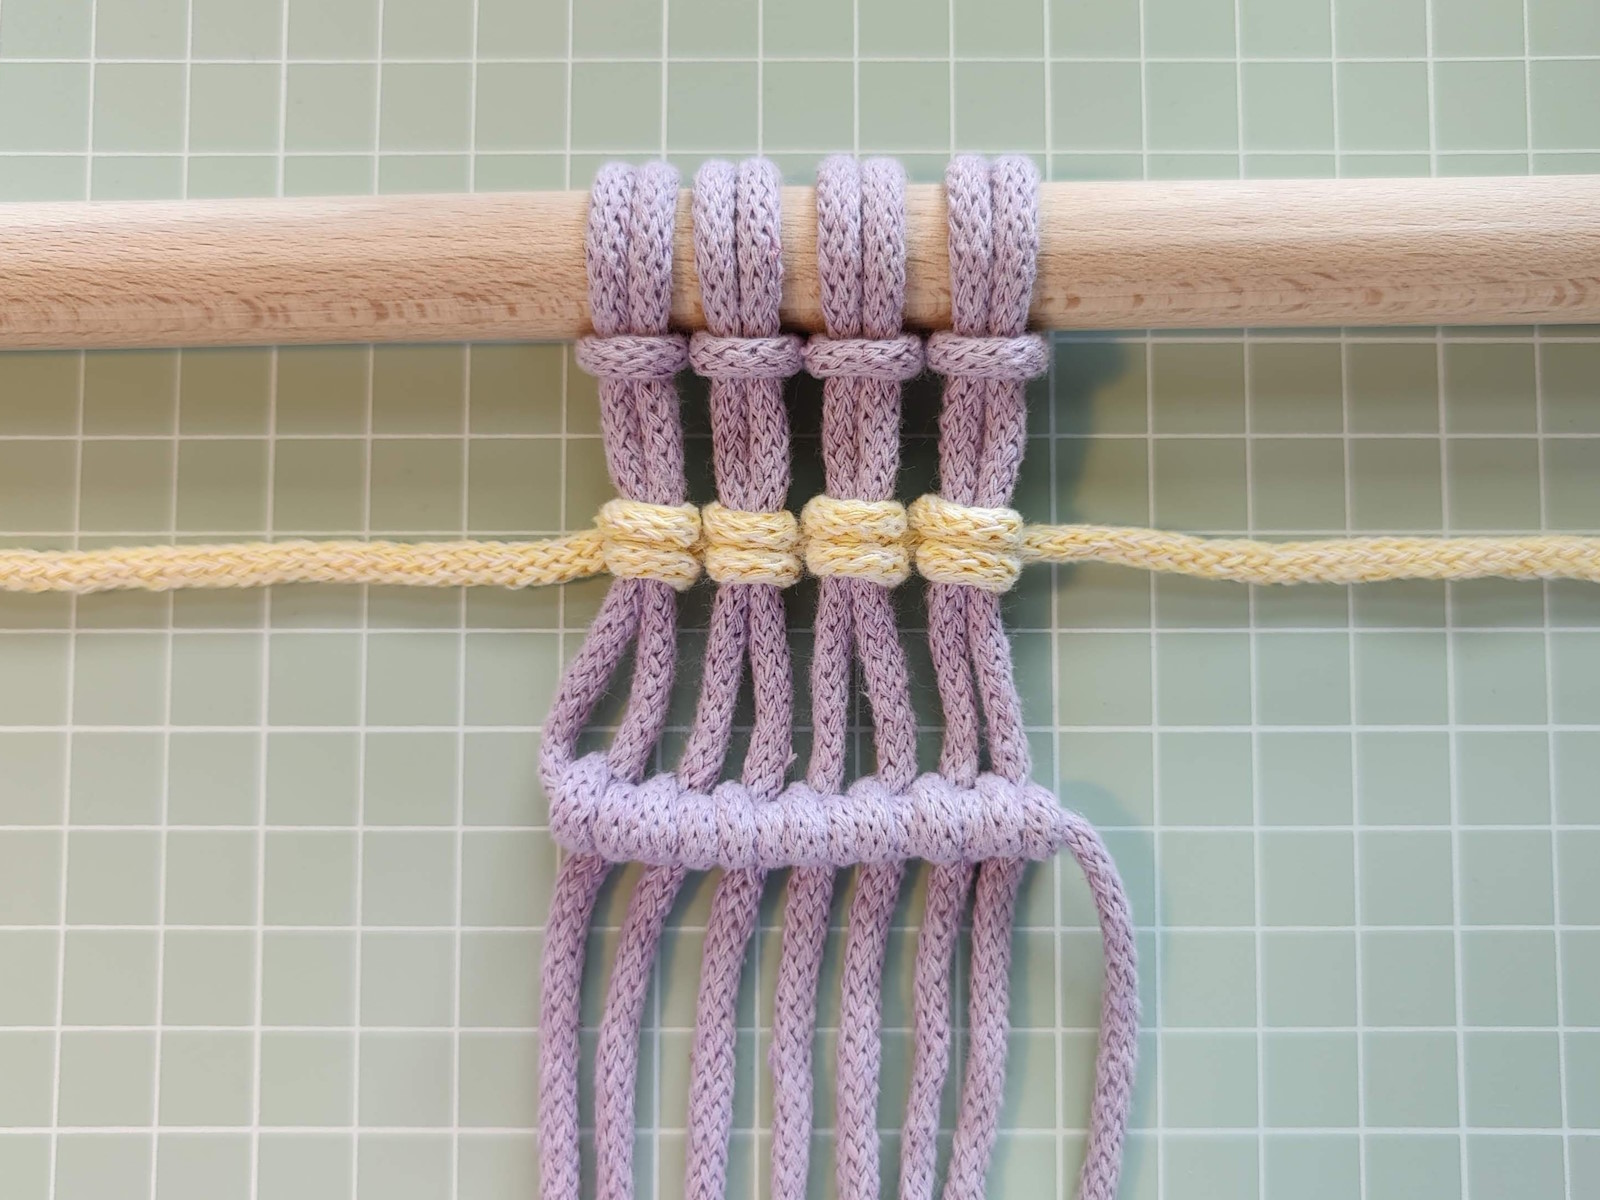 Macrame half hitch knot tutorial: Step-by-step instructions with photos